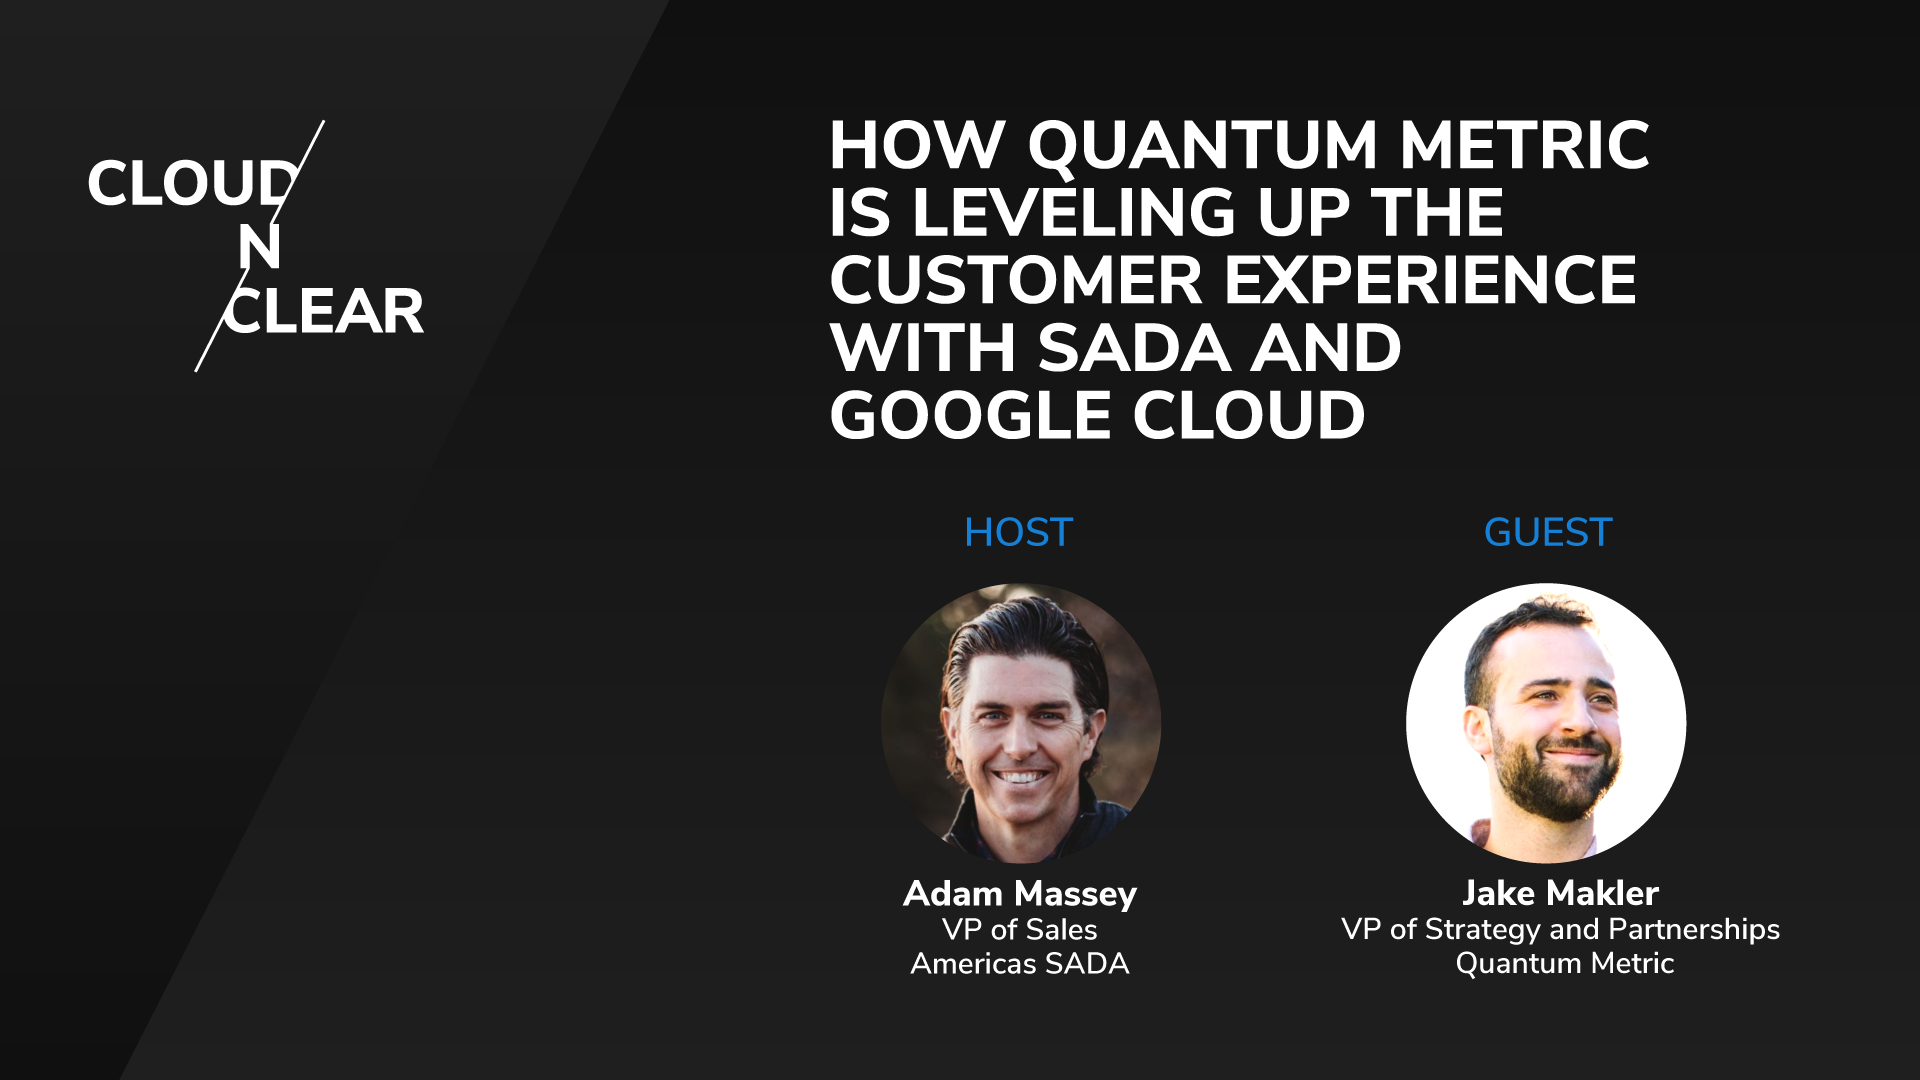 How Quantum Metric is Leveling Up the Customer Experience with SADA and Google Cloud